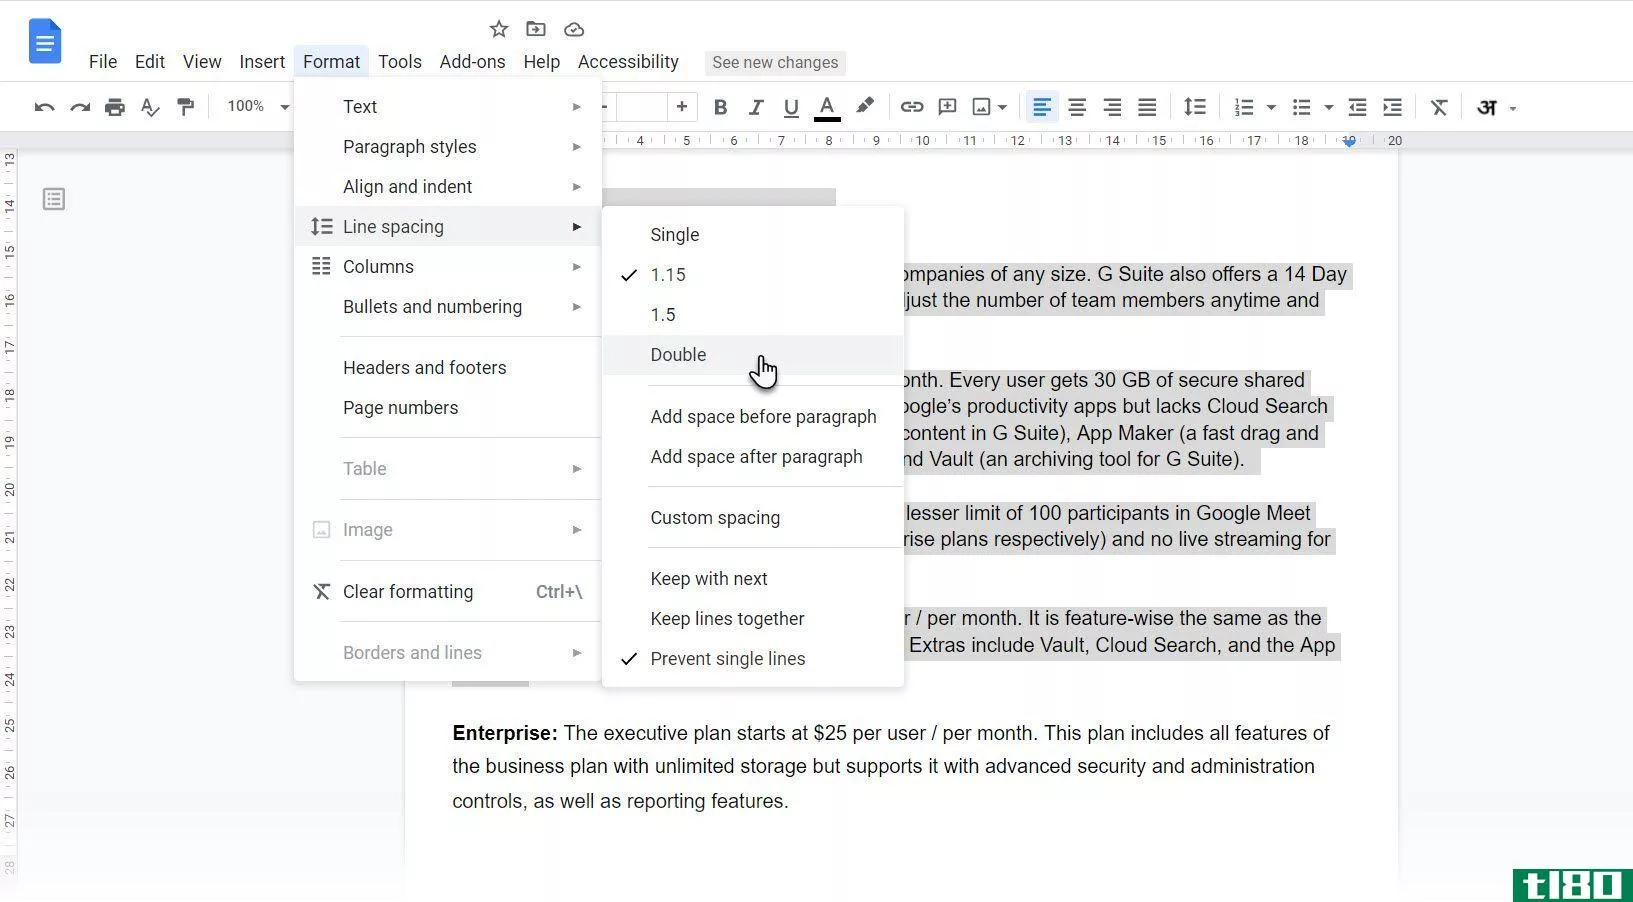 Choosing the double line spacing option from the menubar in Google Docs